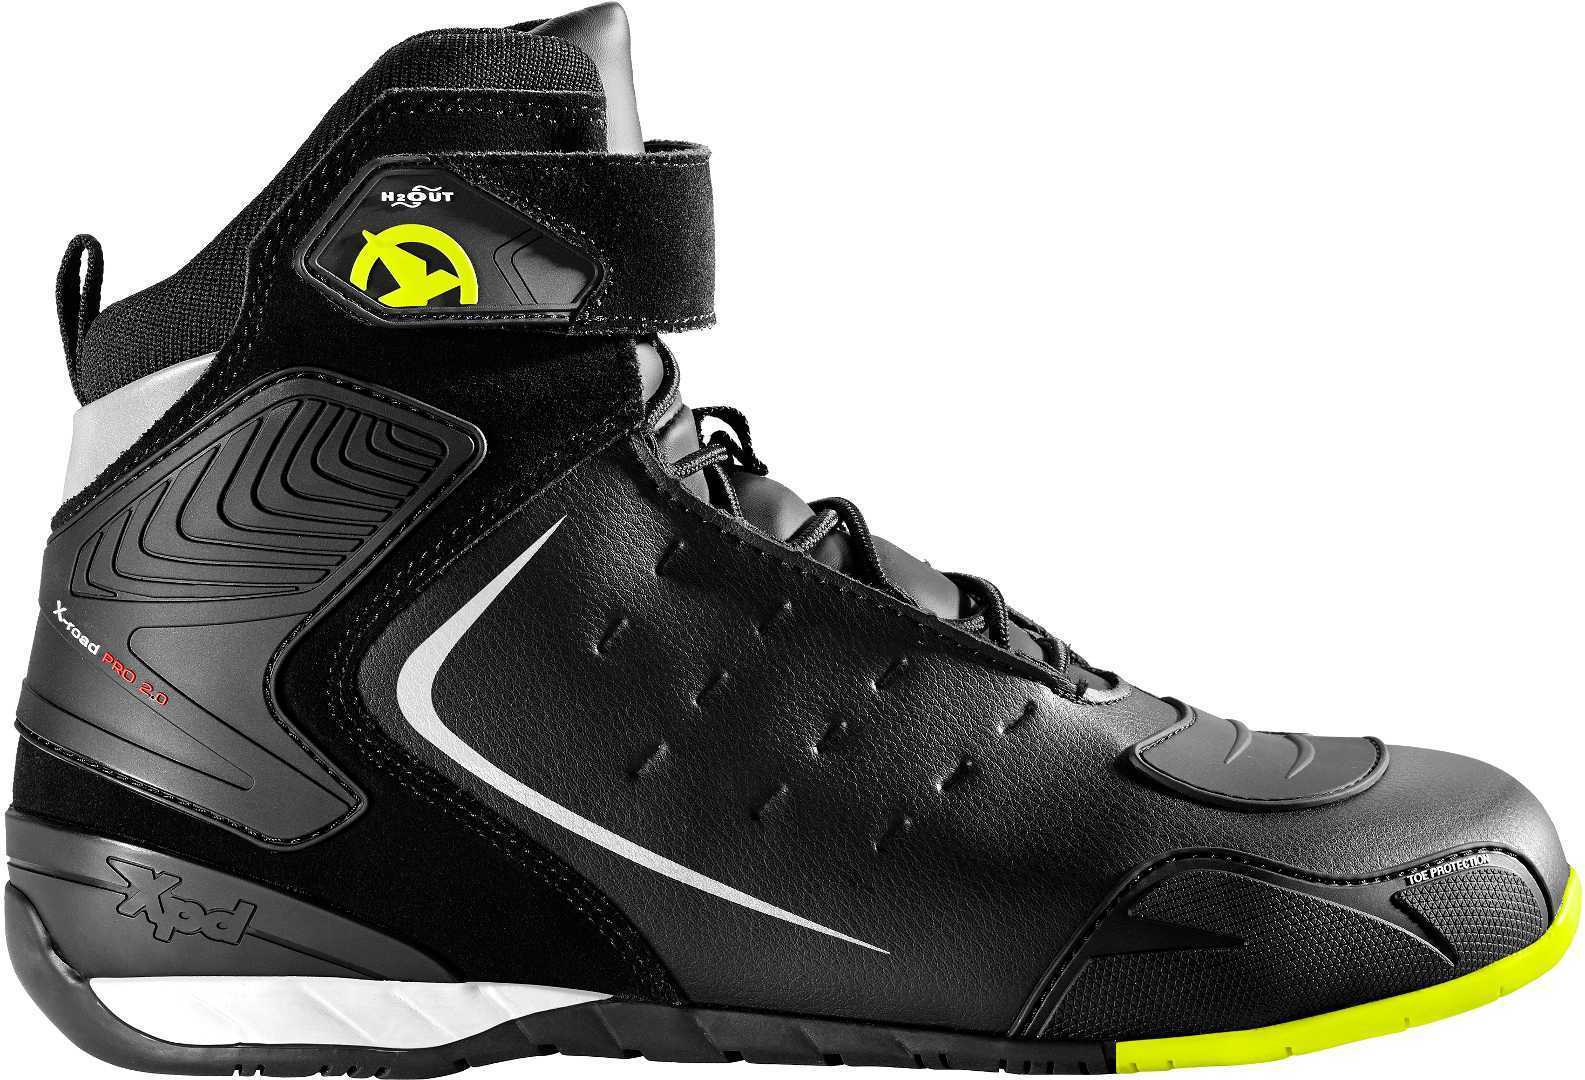 Image of XPD X-Road H2Out Yellow Fluo Size 39 ID 8030161345117